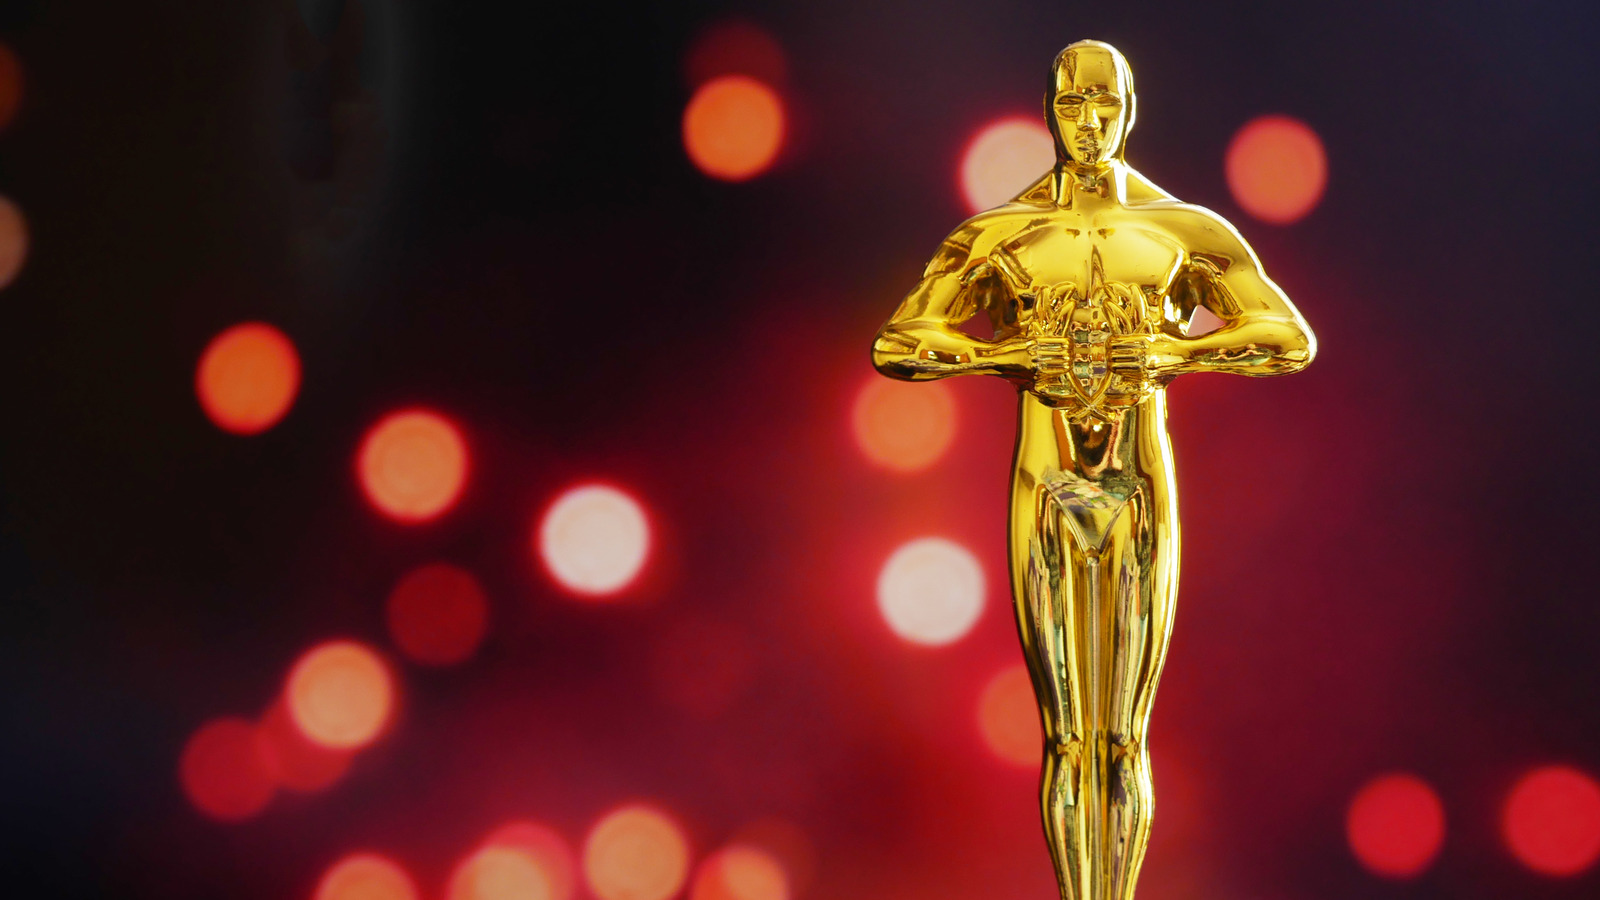 #The Oscars Will Skip Telecasting Some Of The Awards Live This Year